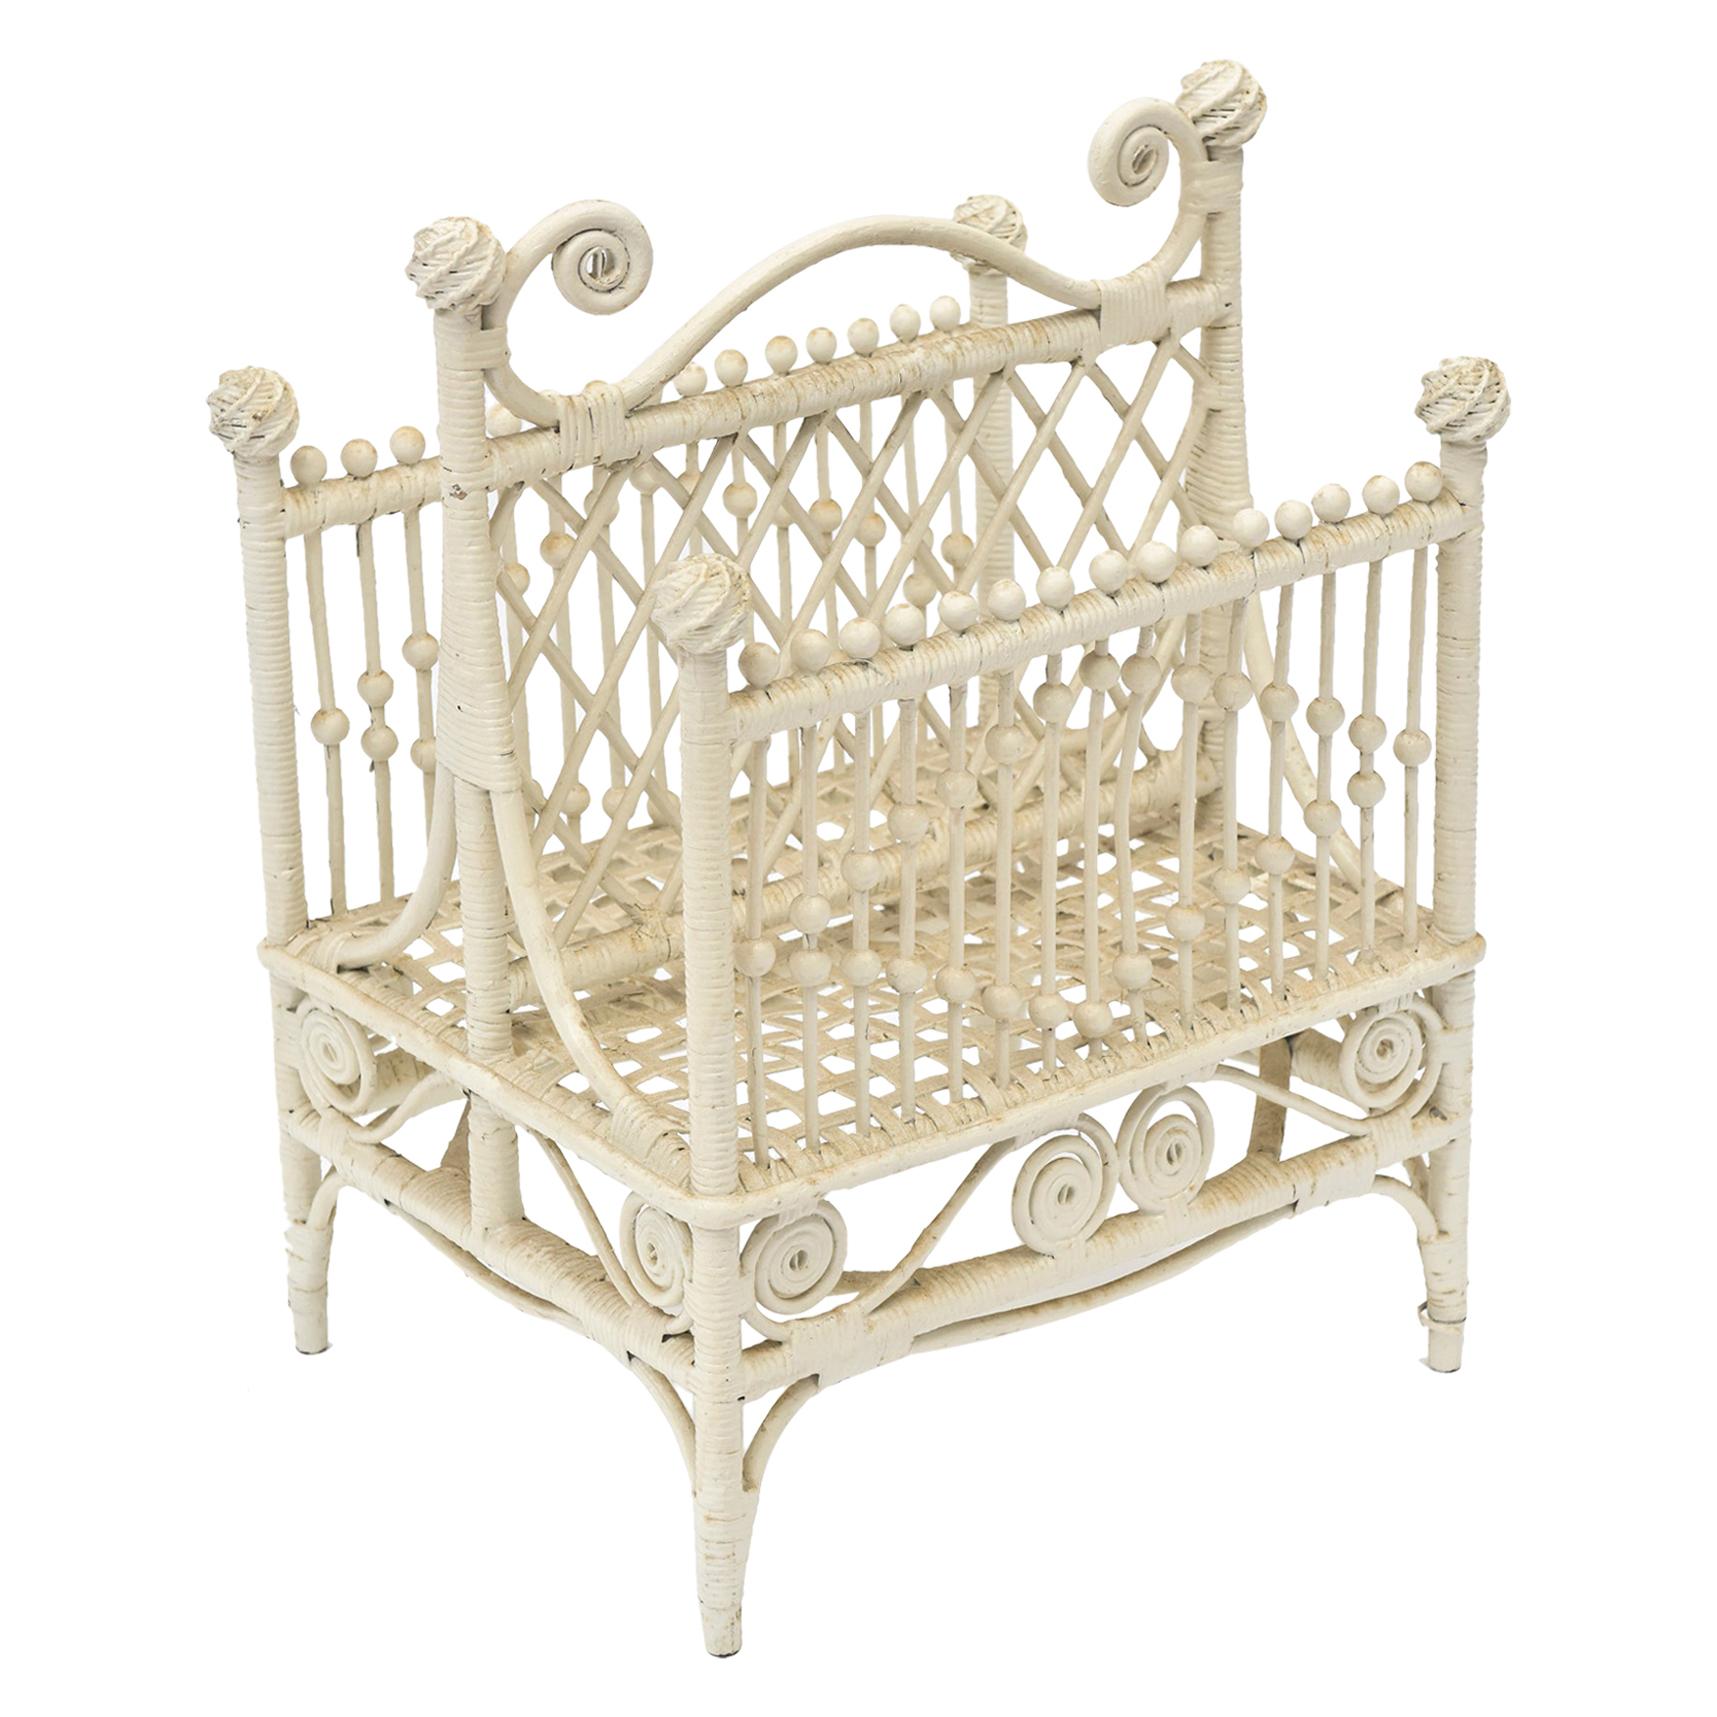 Wicker Ornate Music or Magazine Rack with Beads Curlicues and Woven Ball Finial For Sale